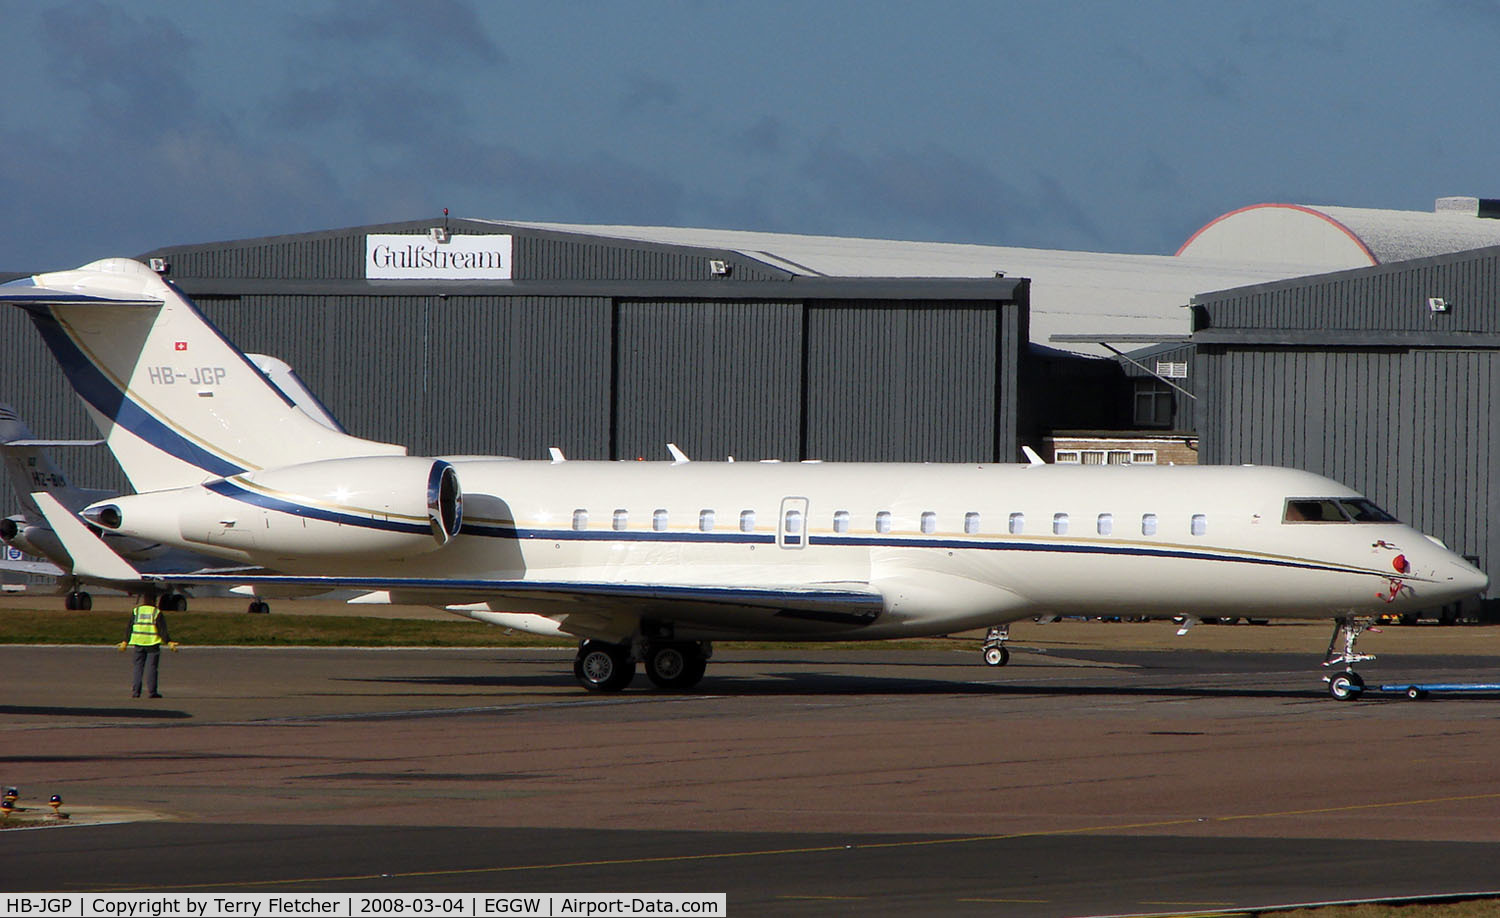 HB-JGP, 2007 Bombardier BD-700-1A10 Global Express XRS C/N 9238, New Global Express at Luton in March 2008